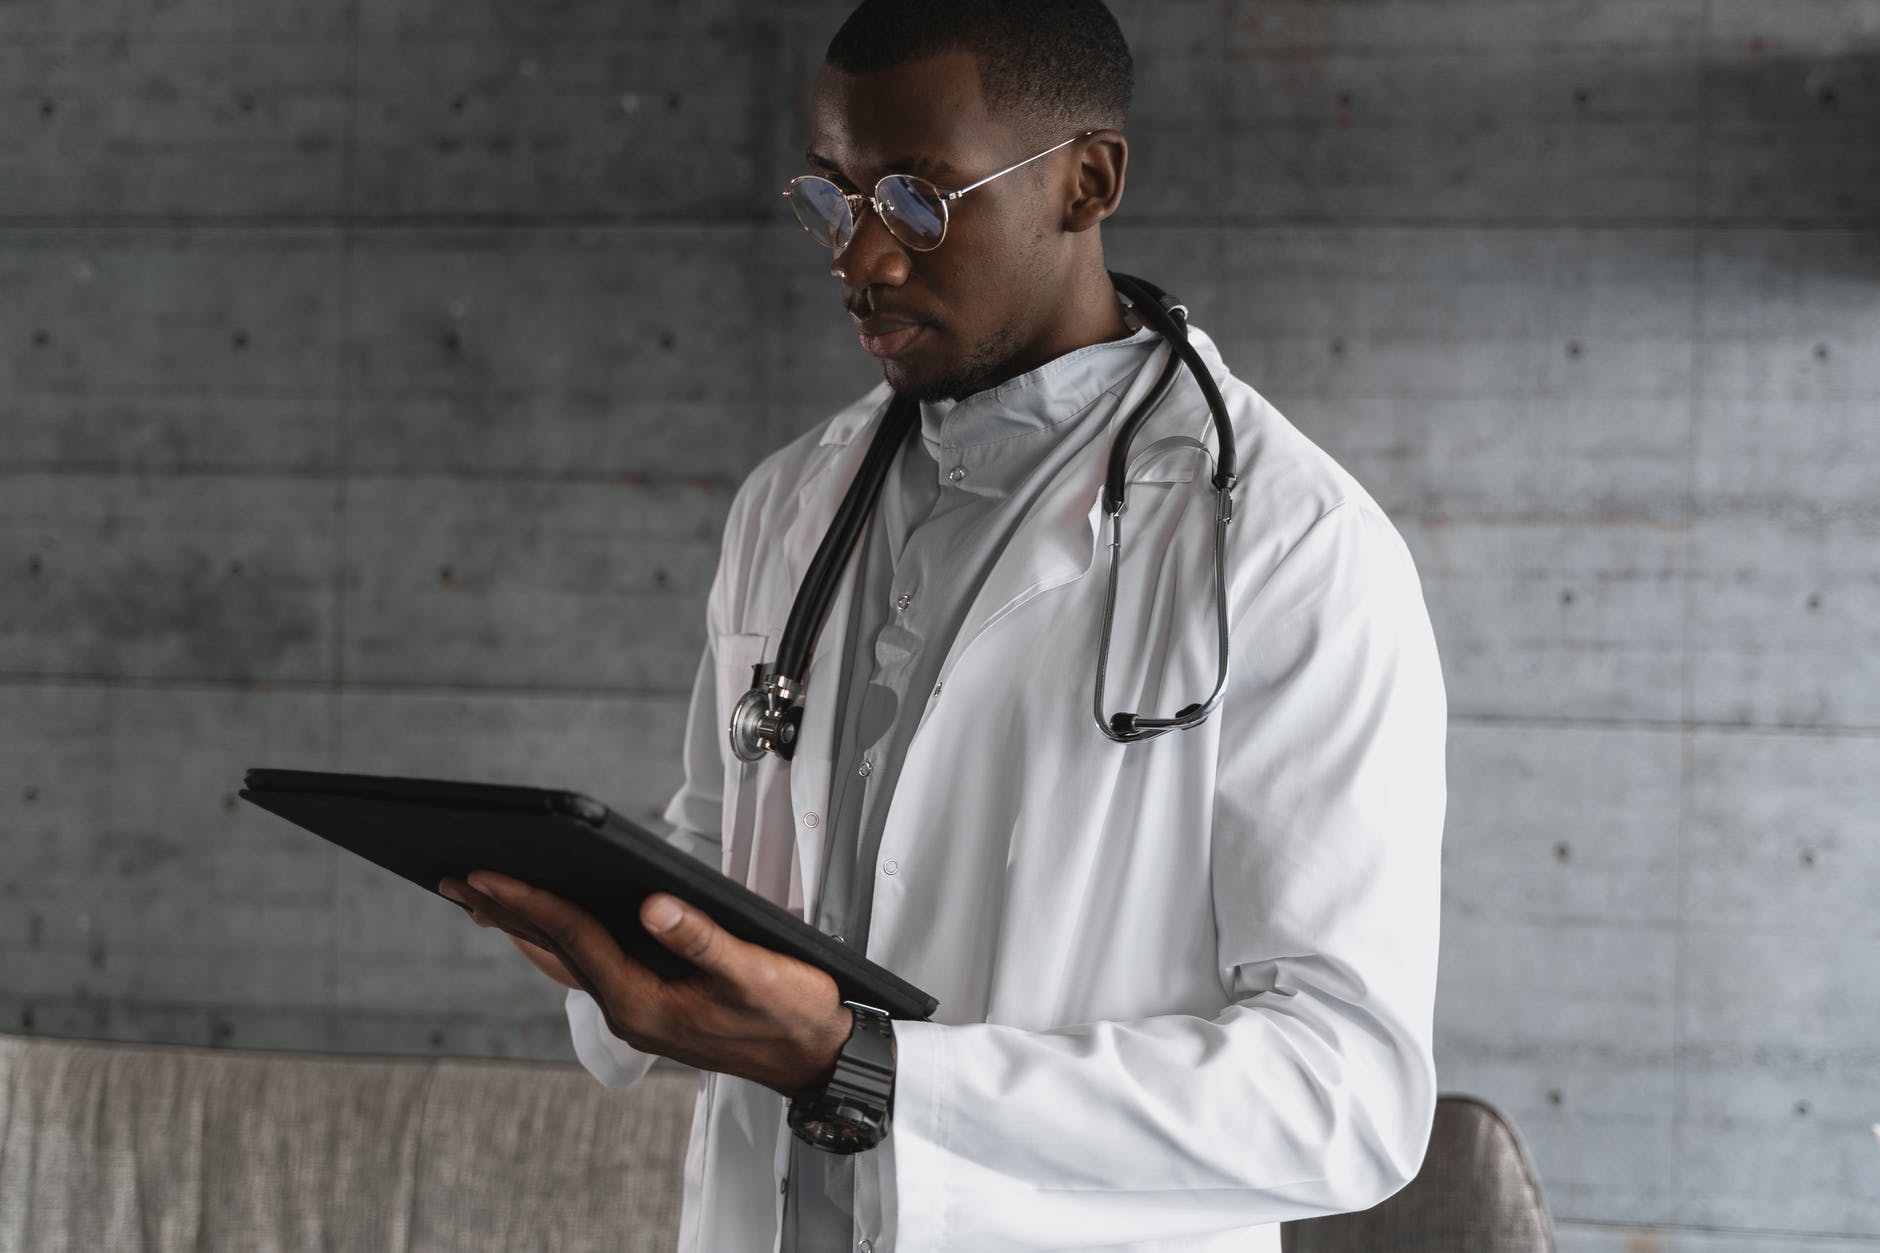 A doctor holding the black tablet. | Photo: Pexels